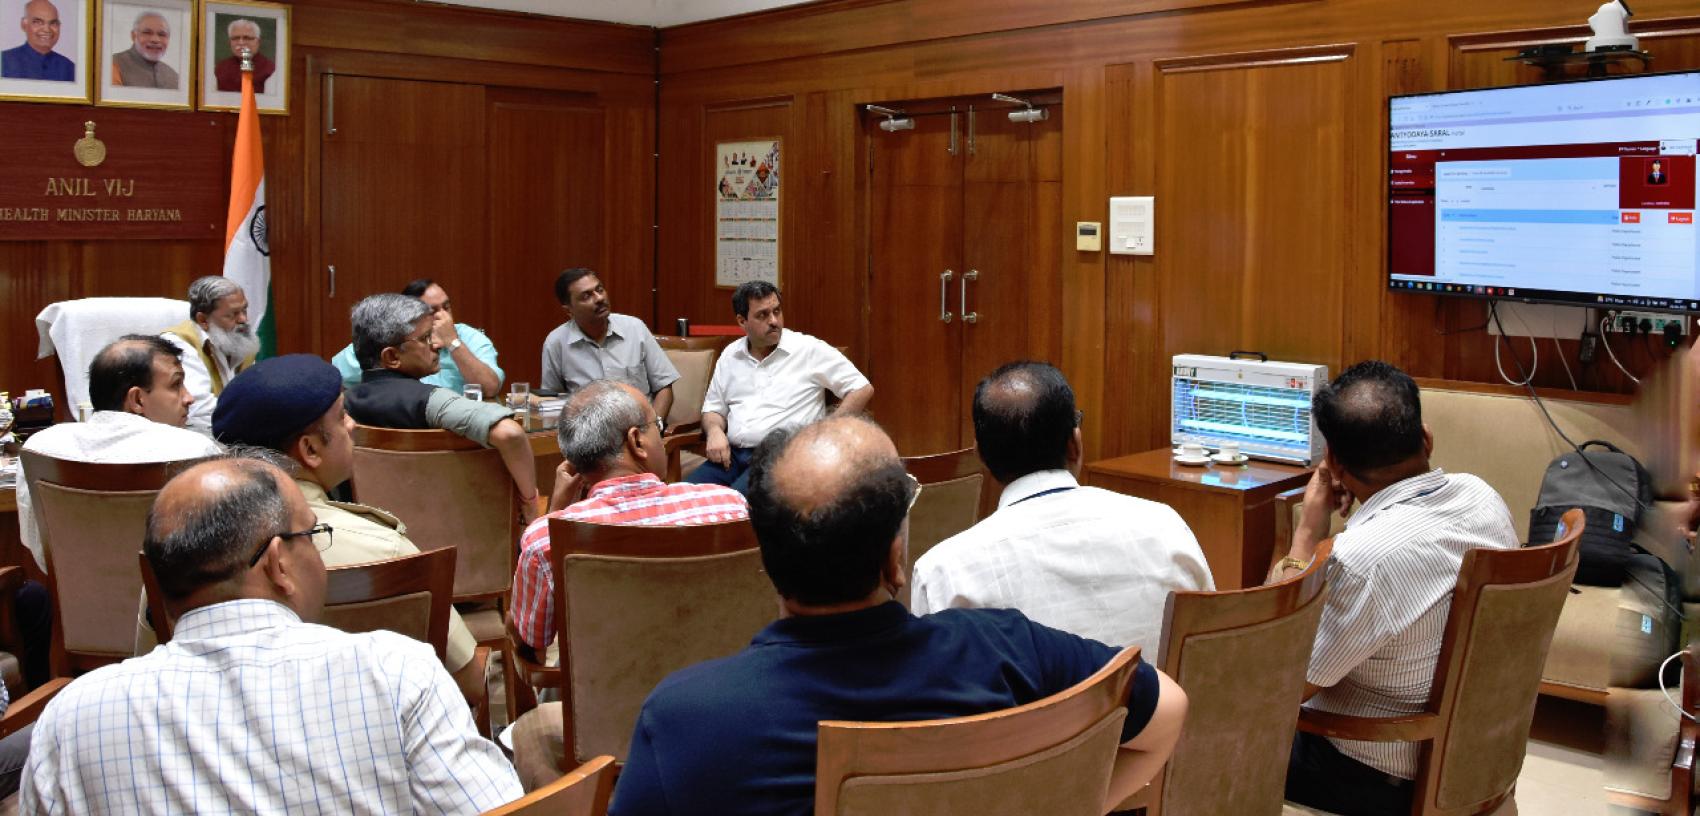 Sh. Alok Srivastava, Scientist-F giving demonstration to Sh. Anil Vij, Home Minister and other officials.